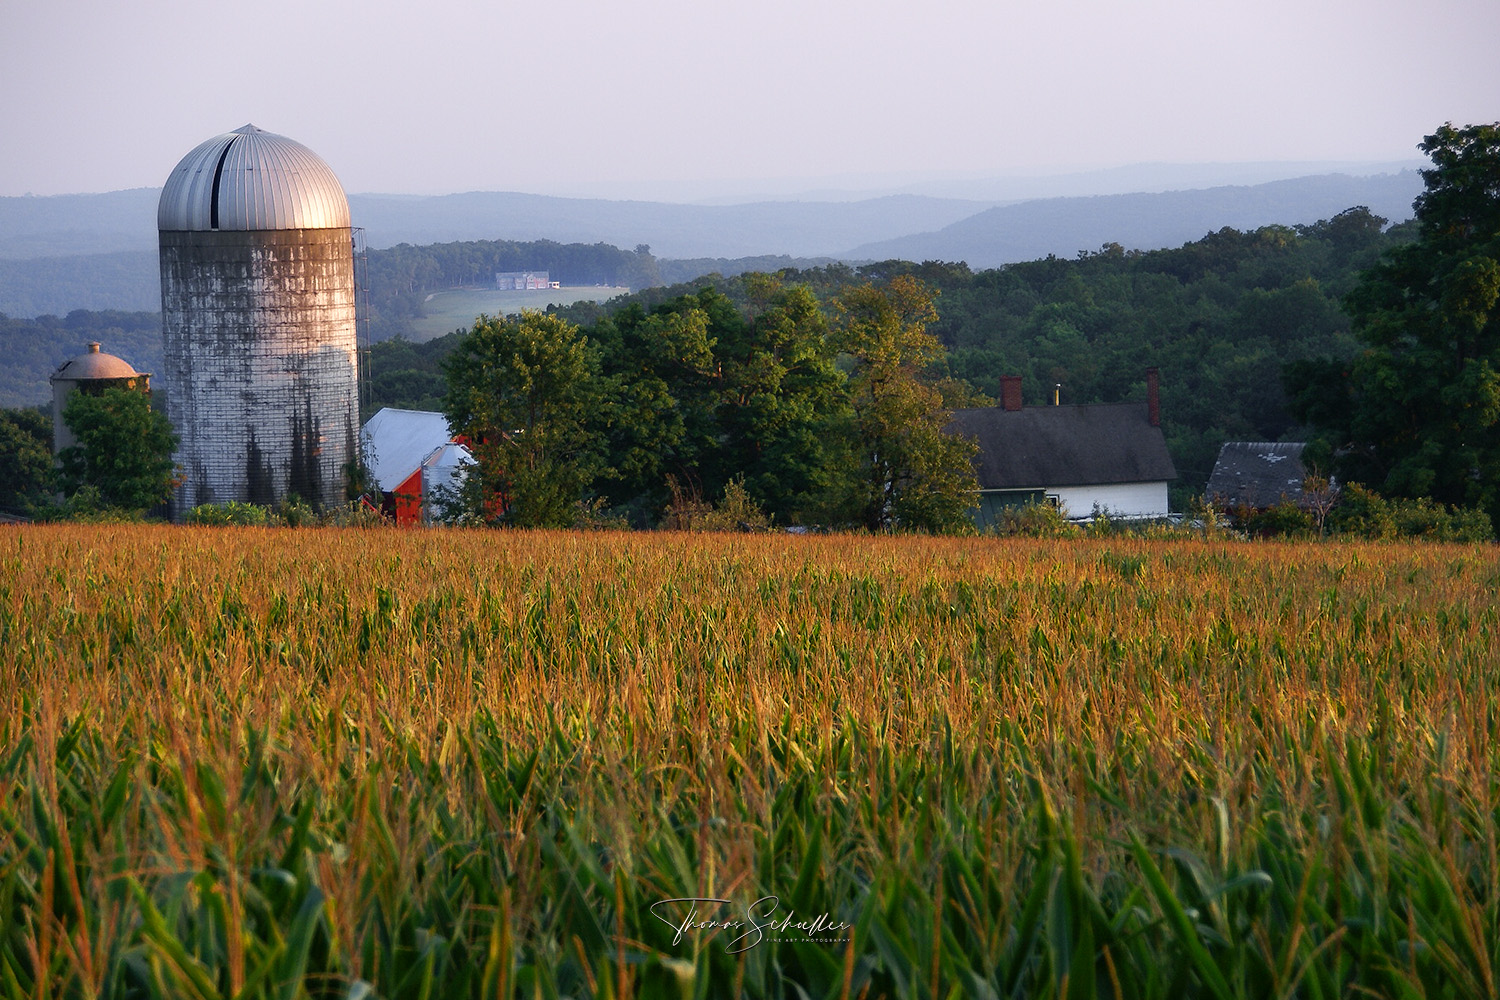 A hazy late summer sunset from the bucolic Tanner Farm in Warren Connecticut overlooking the amber corn tassels | Litchfield Hills scenic landscape prints